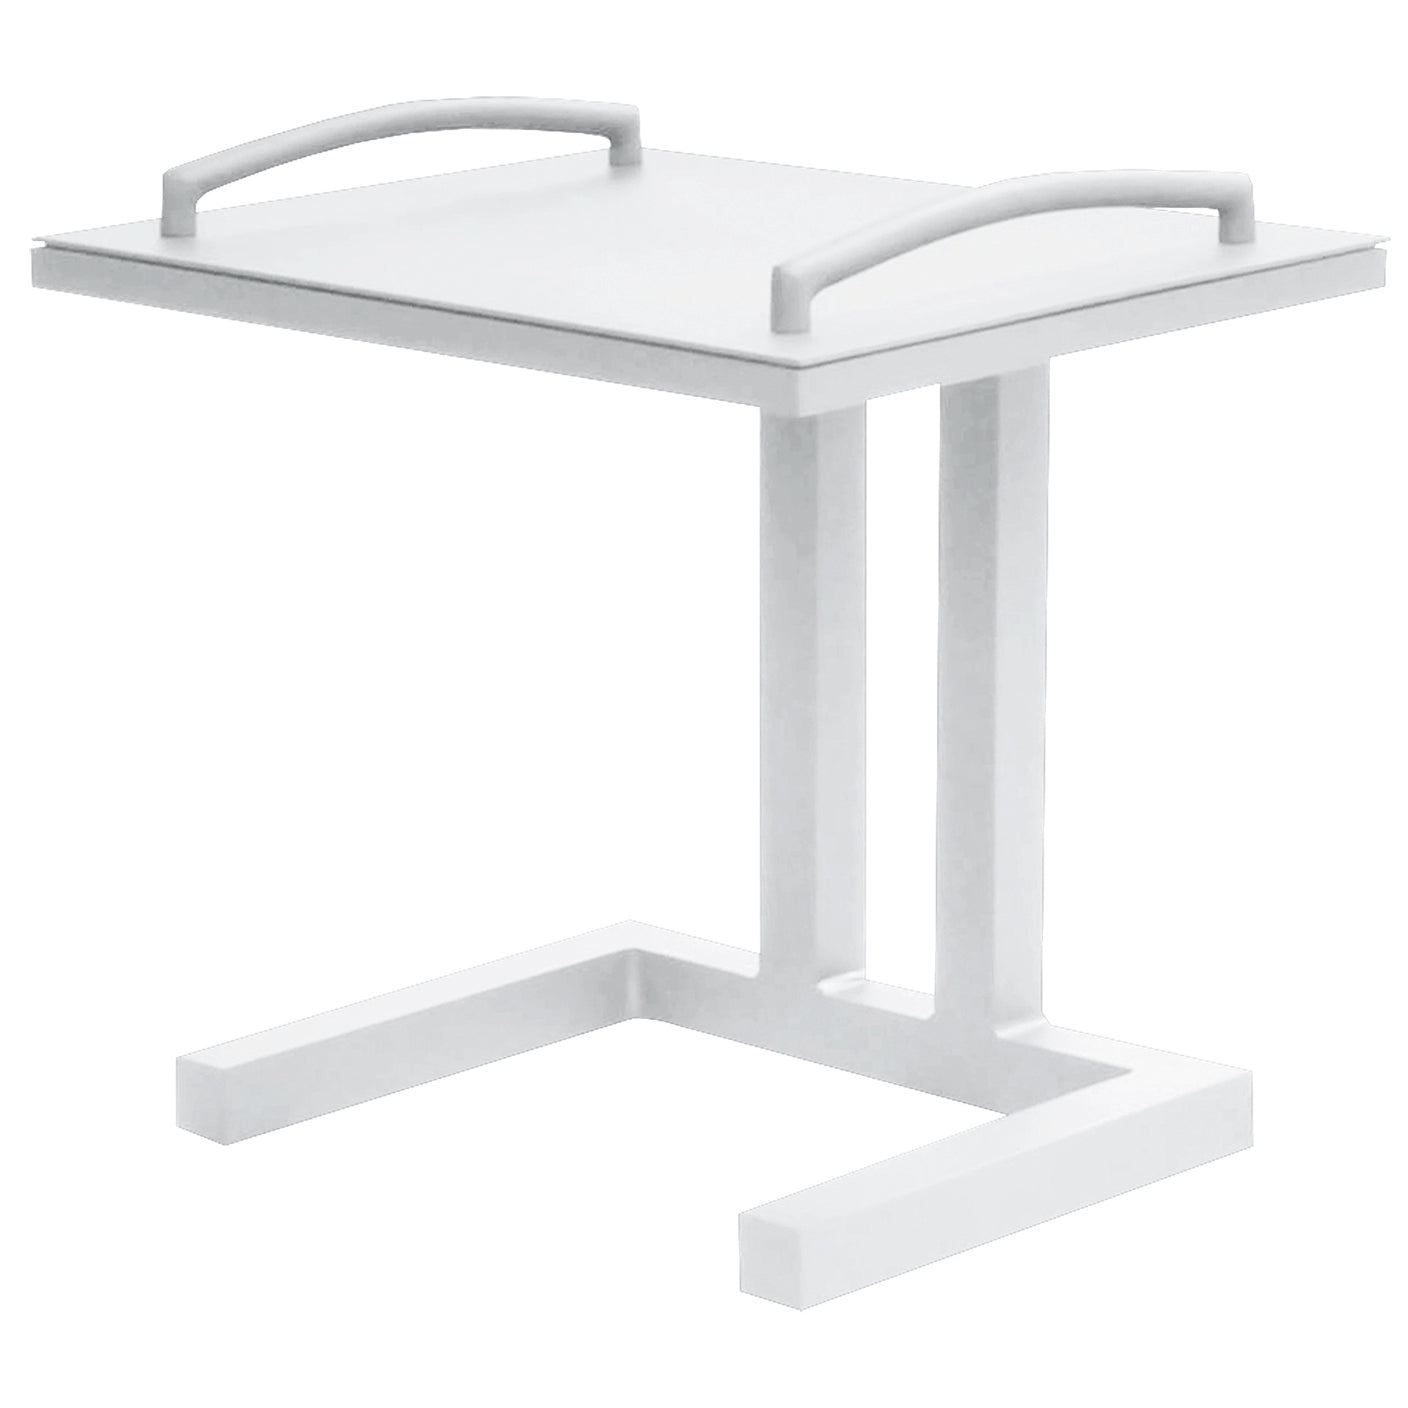 Easy Side table with removable tray in white